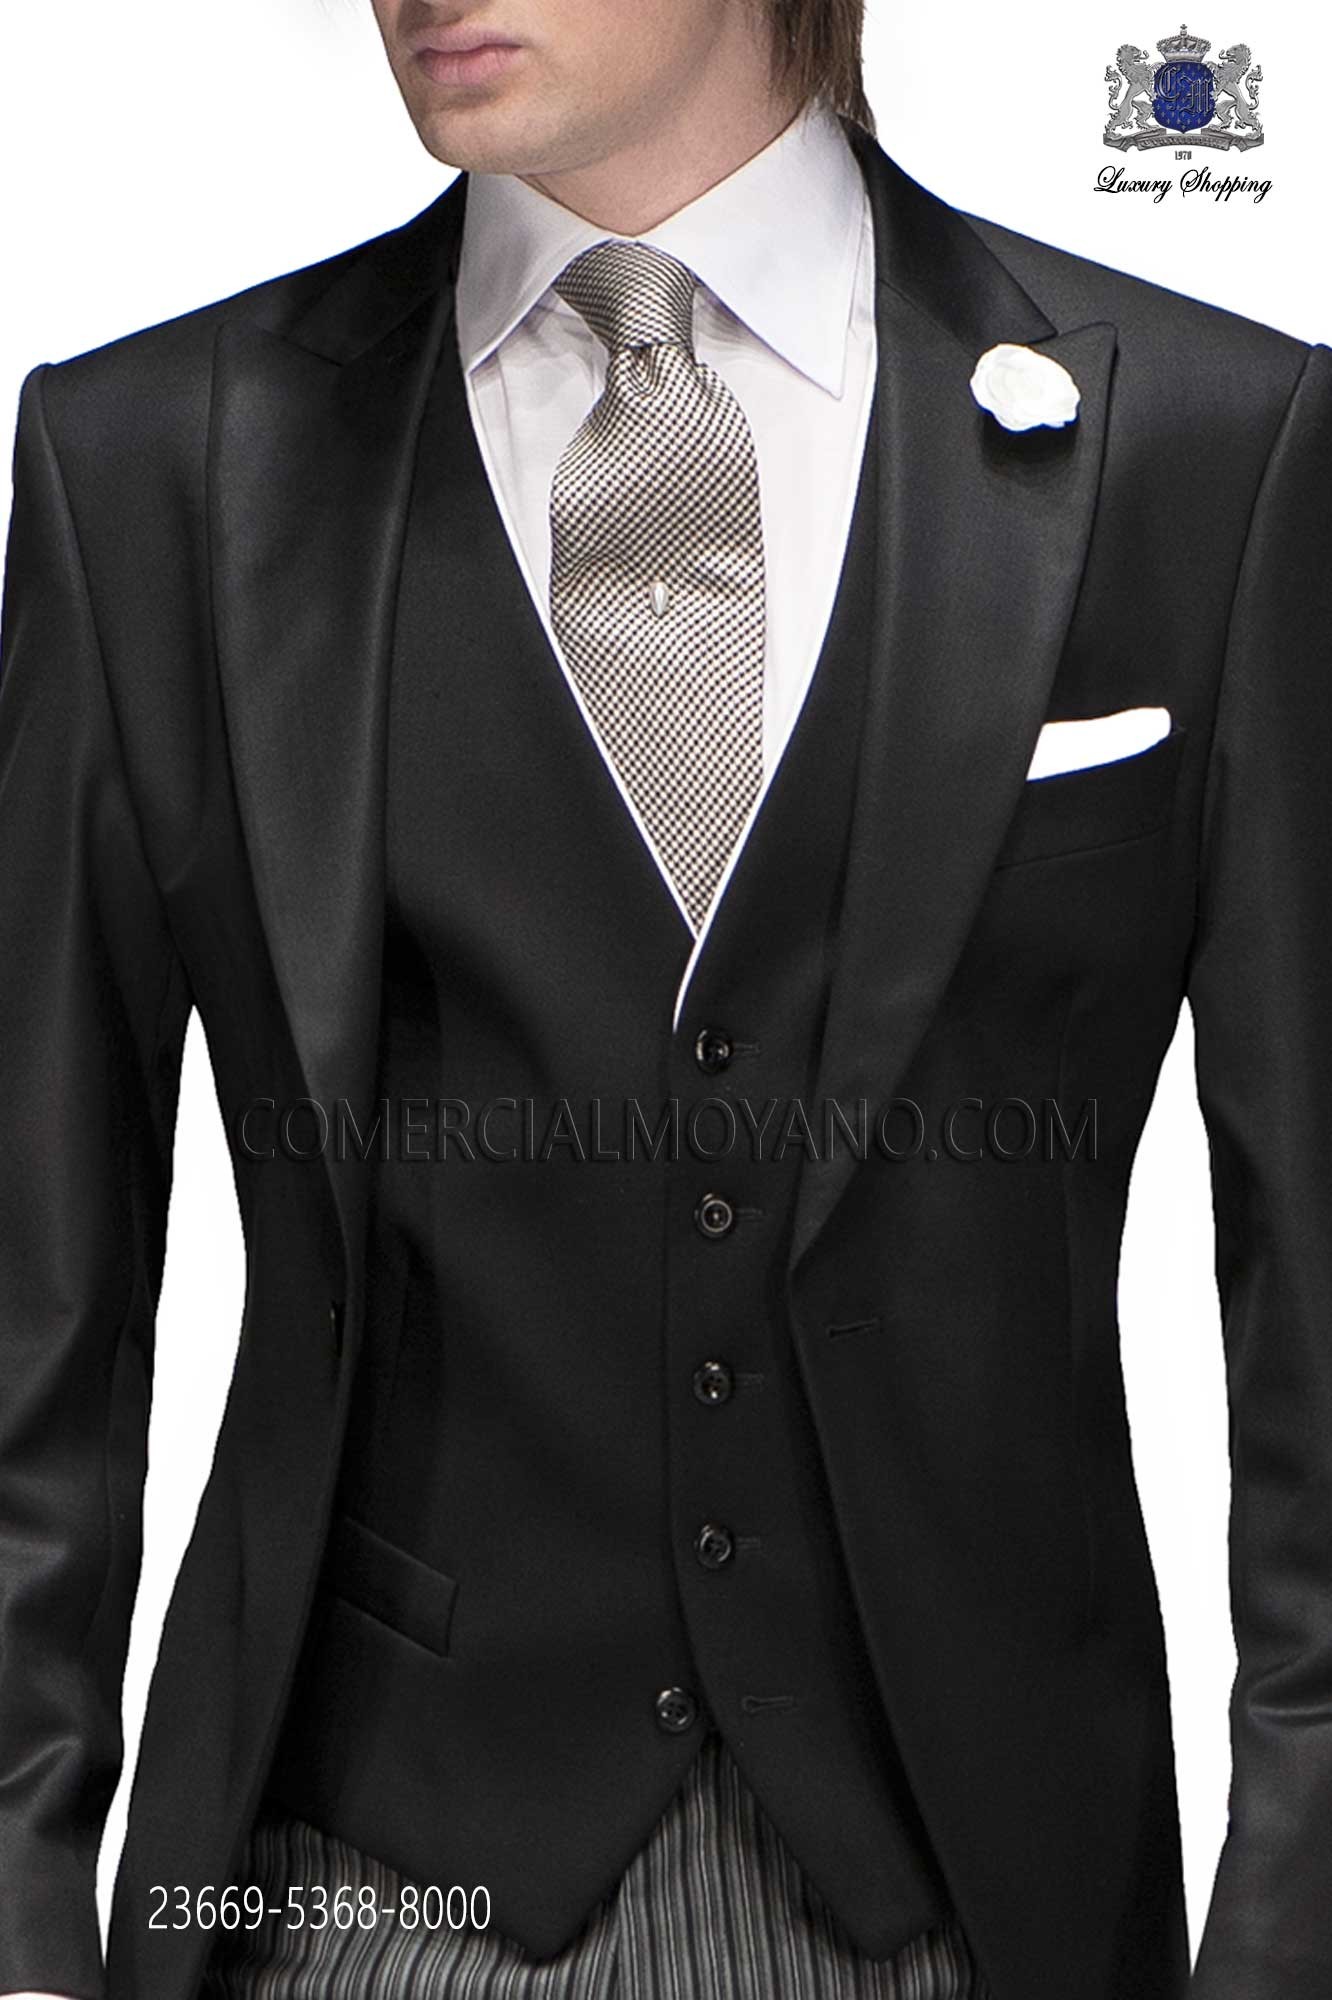 Black plain wool formal waistcoat with contrast white piping.